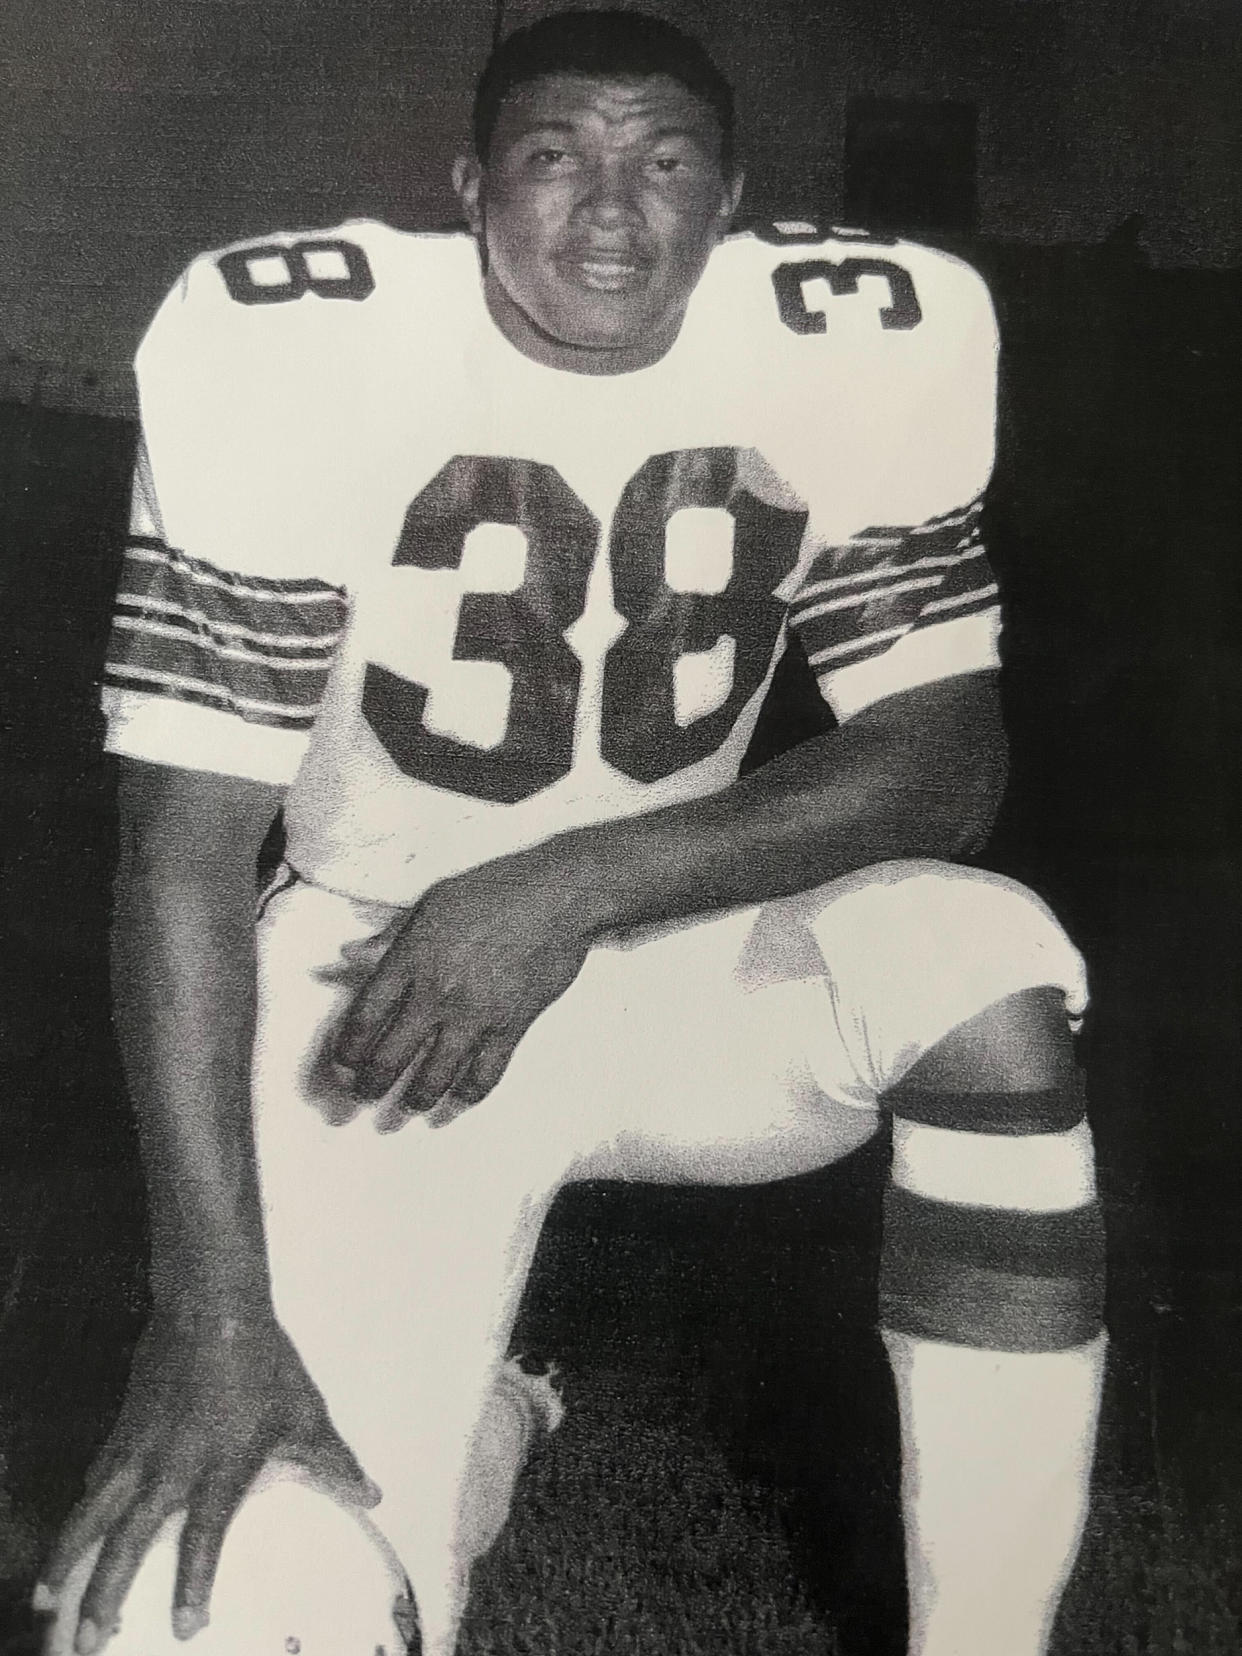 Bill Triplett during his time playing for the NFL. (Courtesy Triplett family)